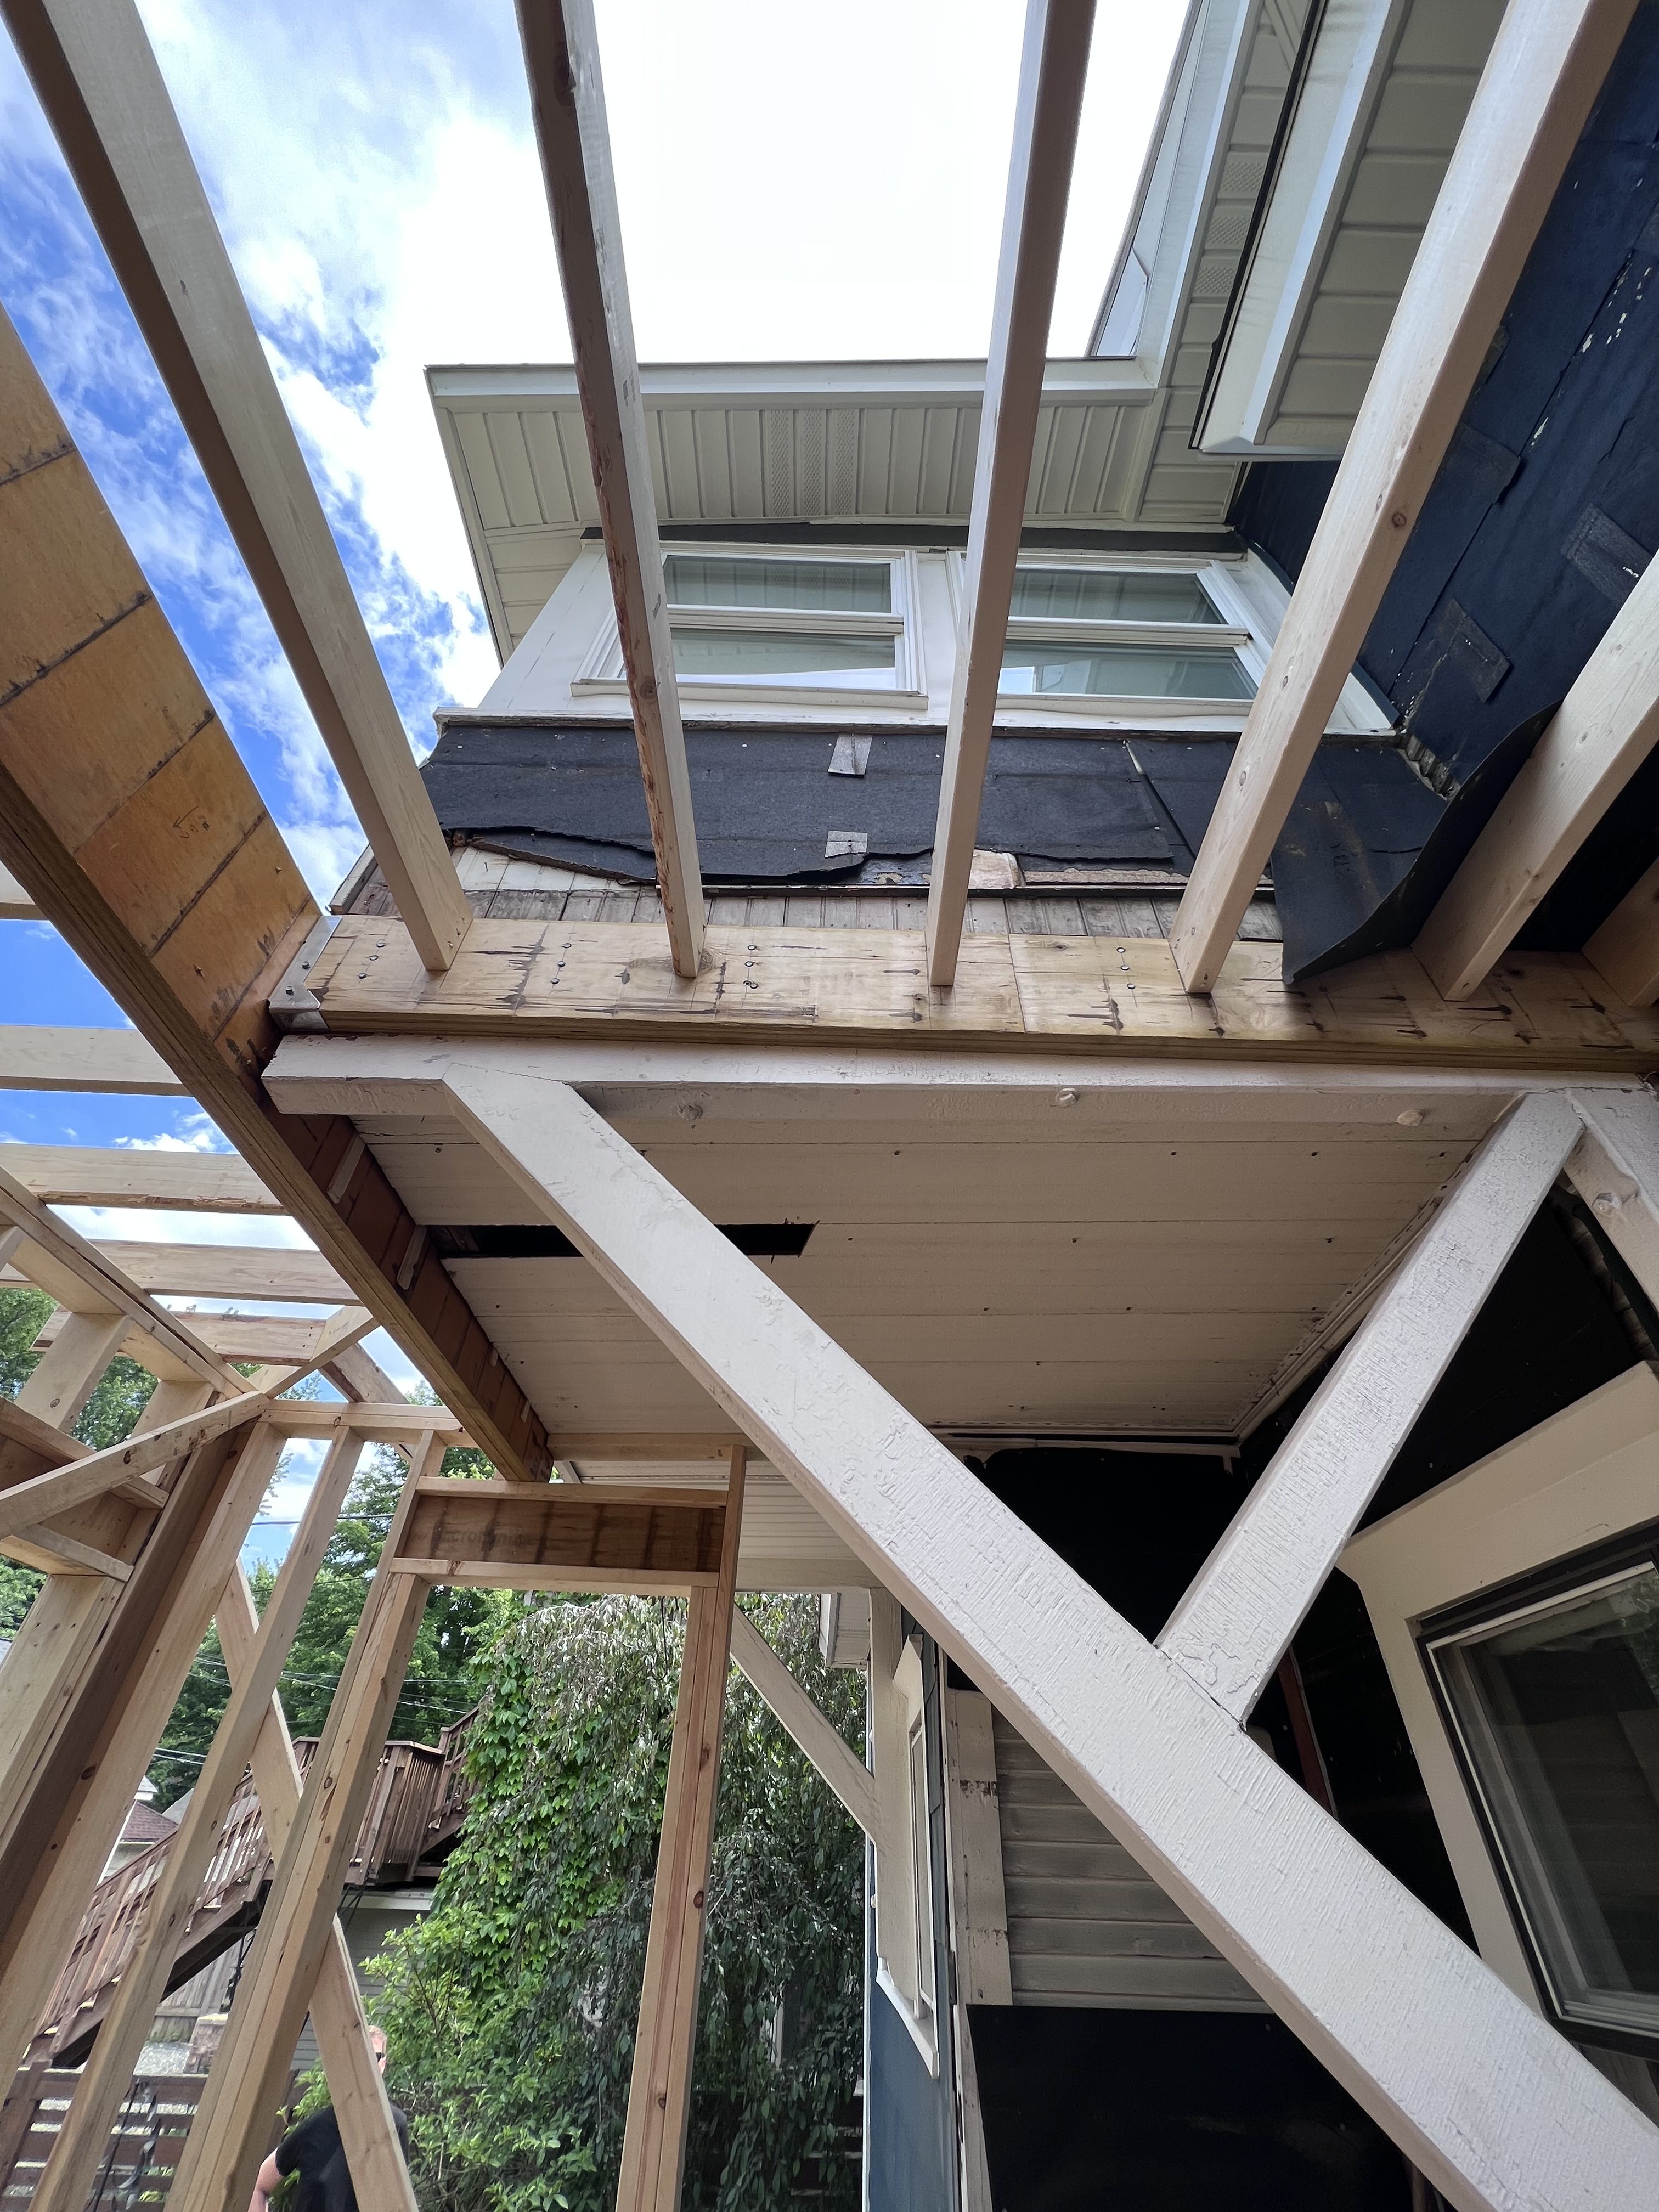 Beam to Reinforce the Above Porch and roofline